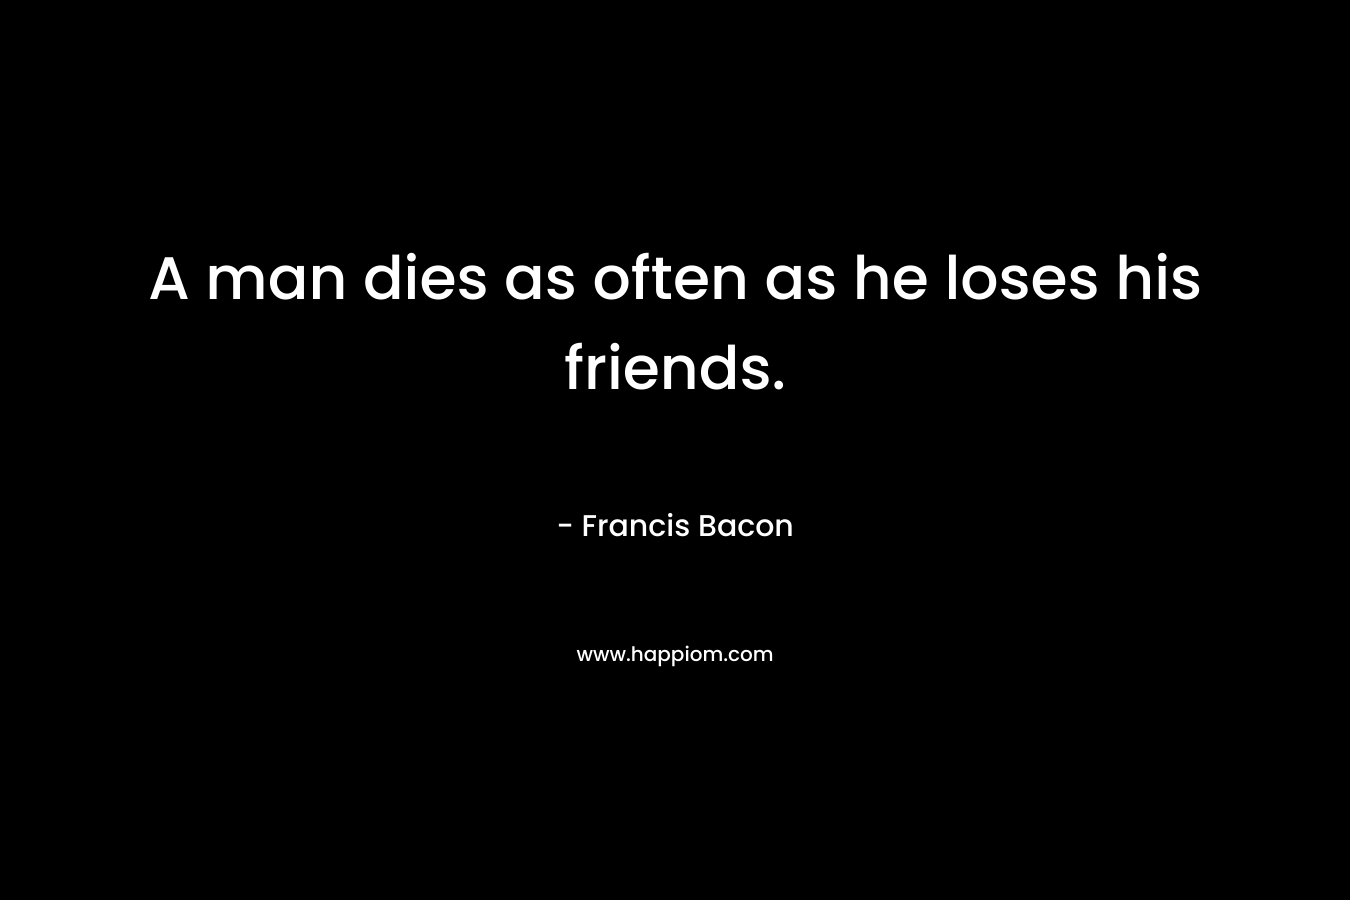 A man dies as often as he loses his friends.